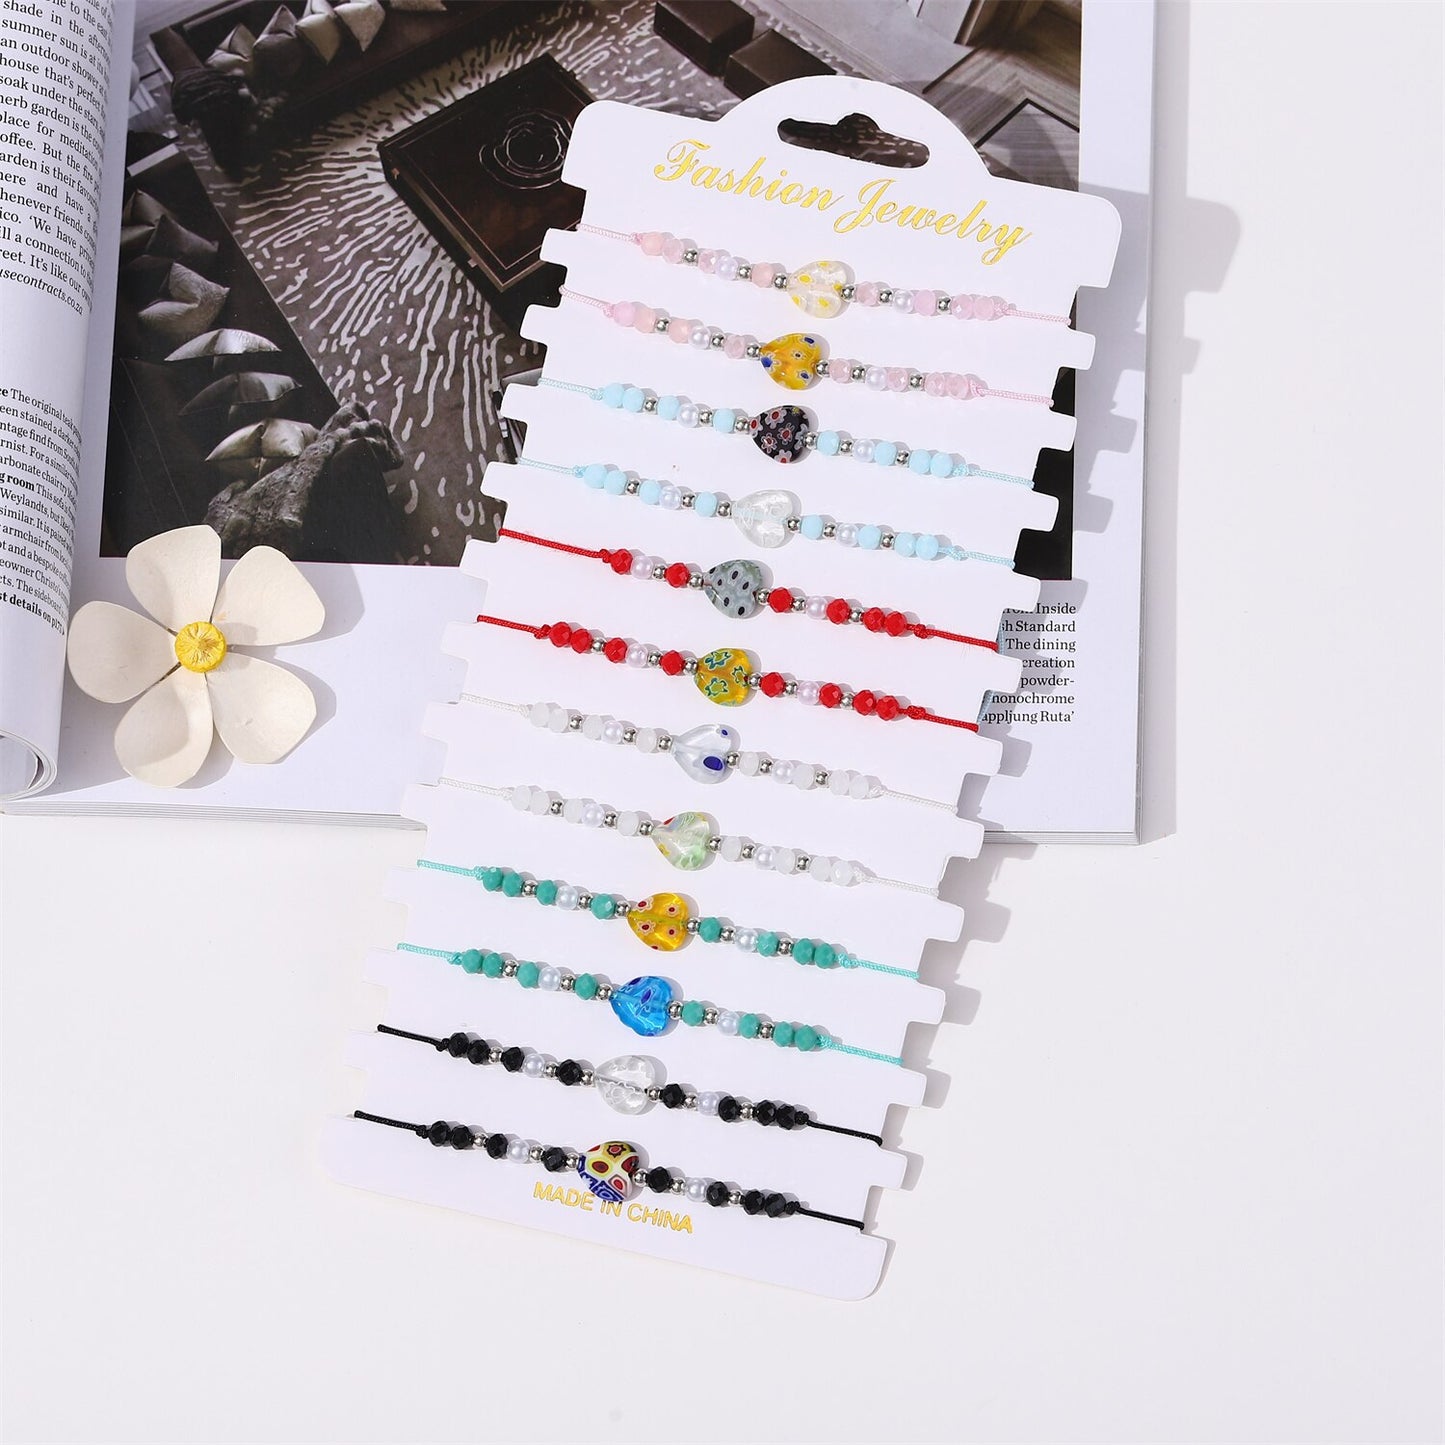 12 Pieces Crystal Seed Beads Heart Pendant Bracelet for Women Men Adjustable Summer Surf Anklet Jewelry Mixed Colors Wholesale